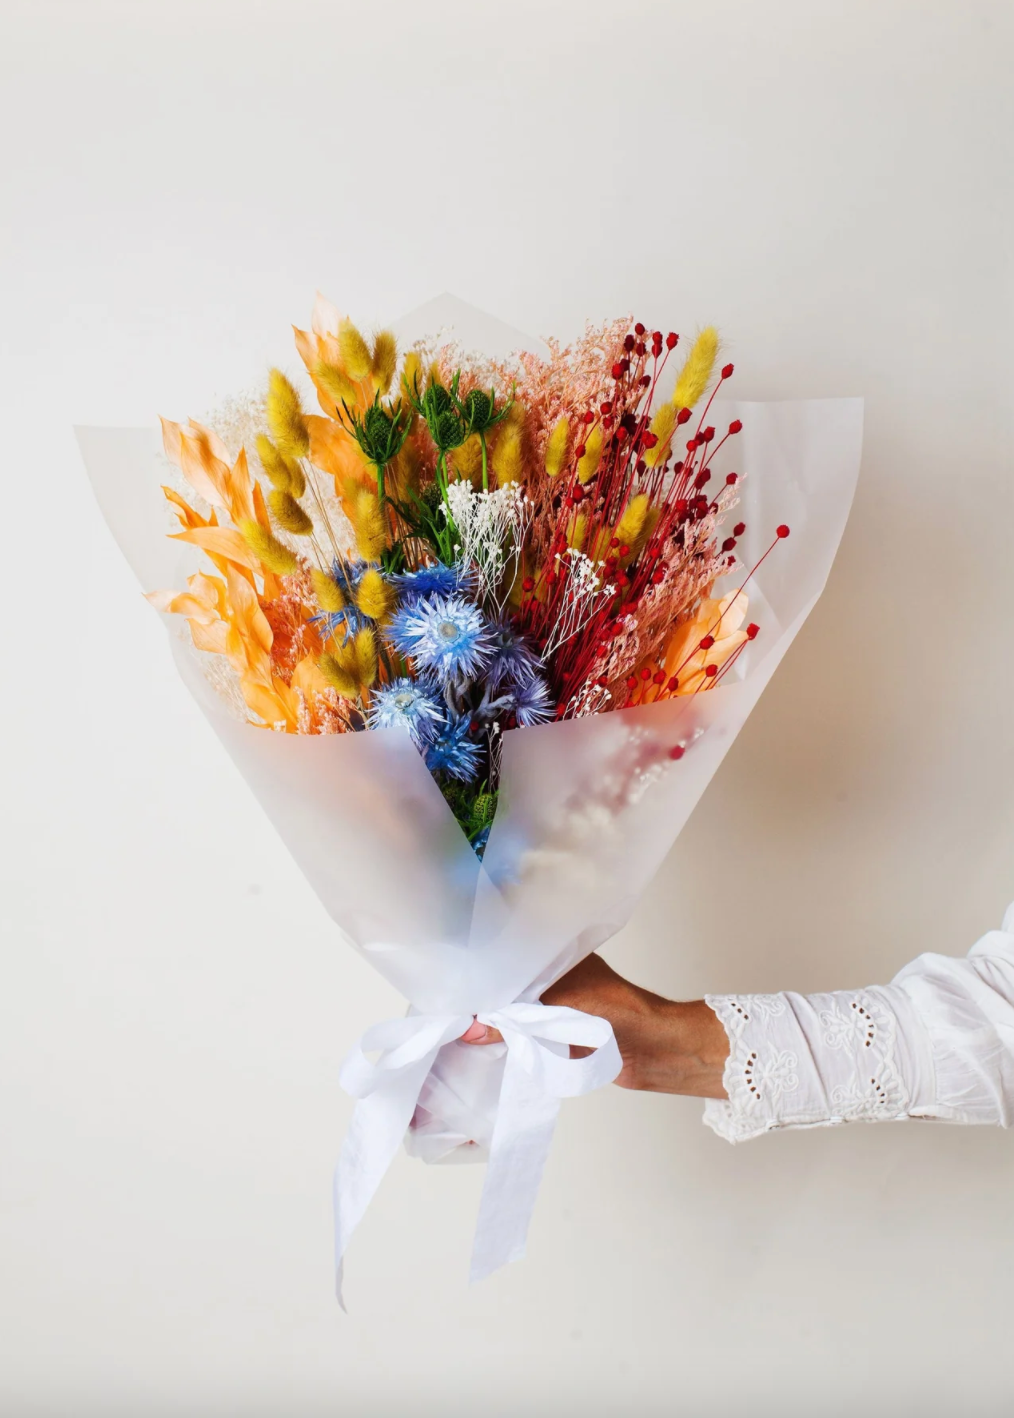 17 Gorgeous Fall Flower Arrangements and Bouquets That'll Dress Up Your Home